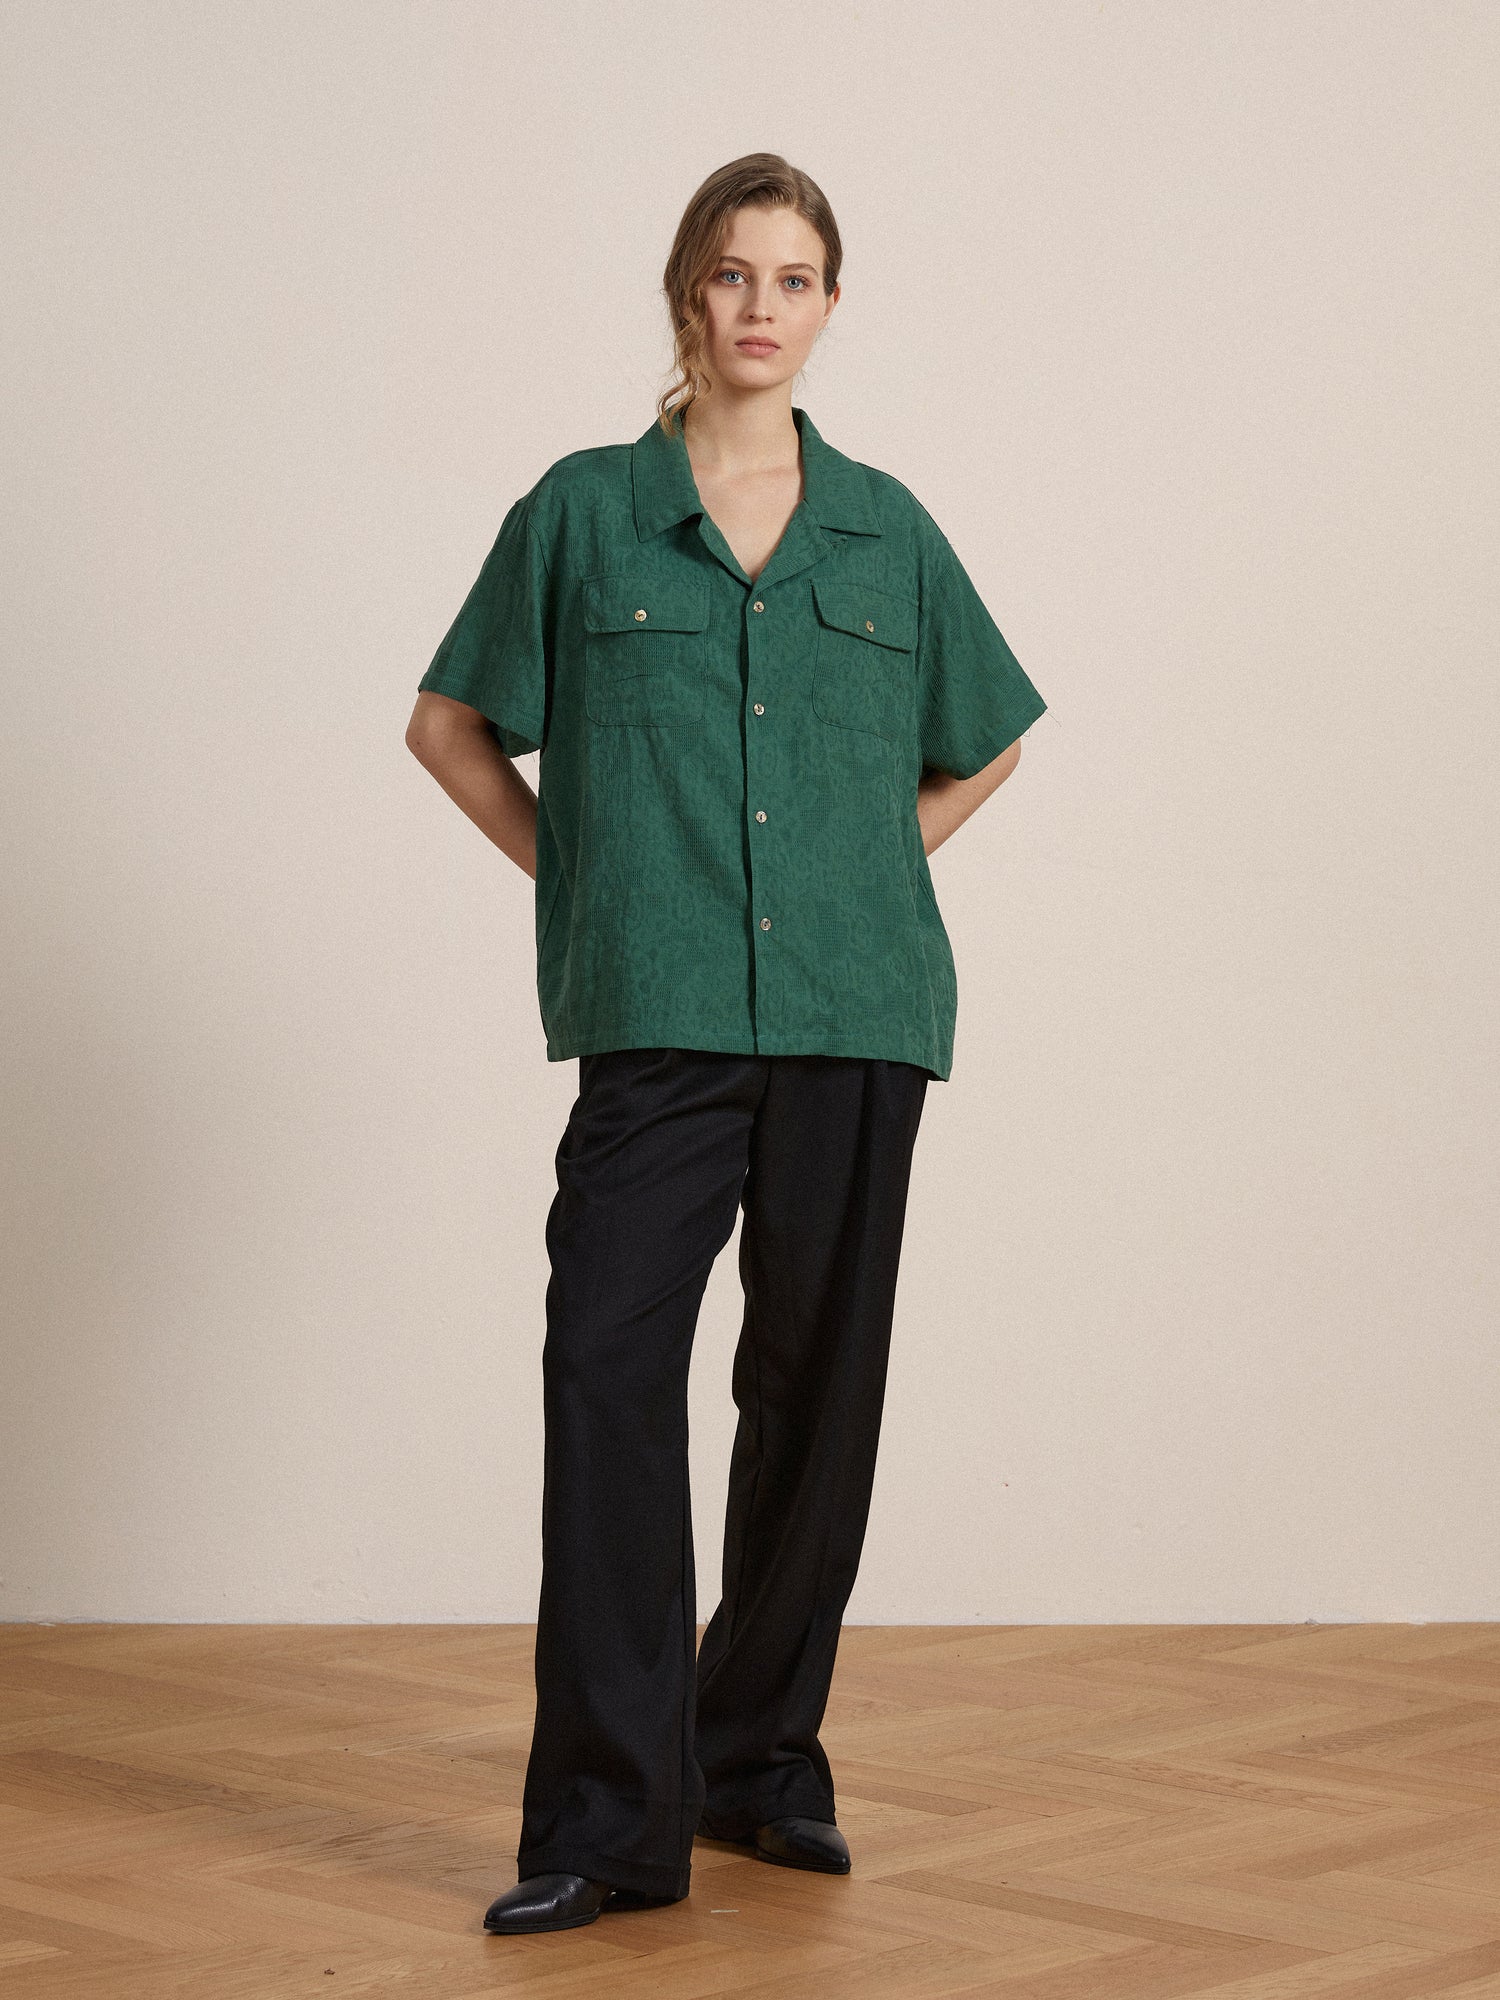 The model is wearing a Found Mount Camp Shirt in green and black trousers.